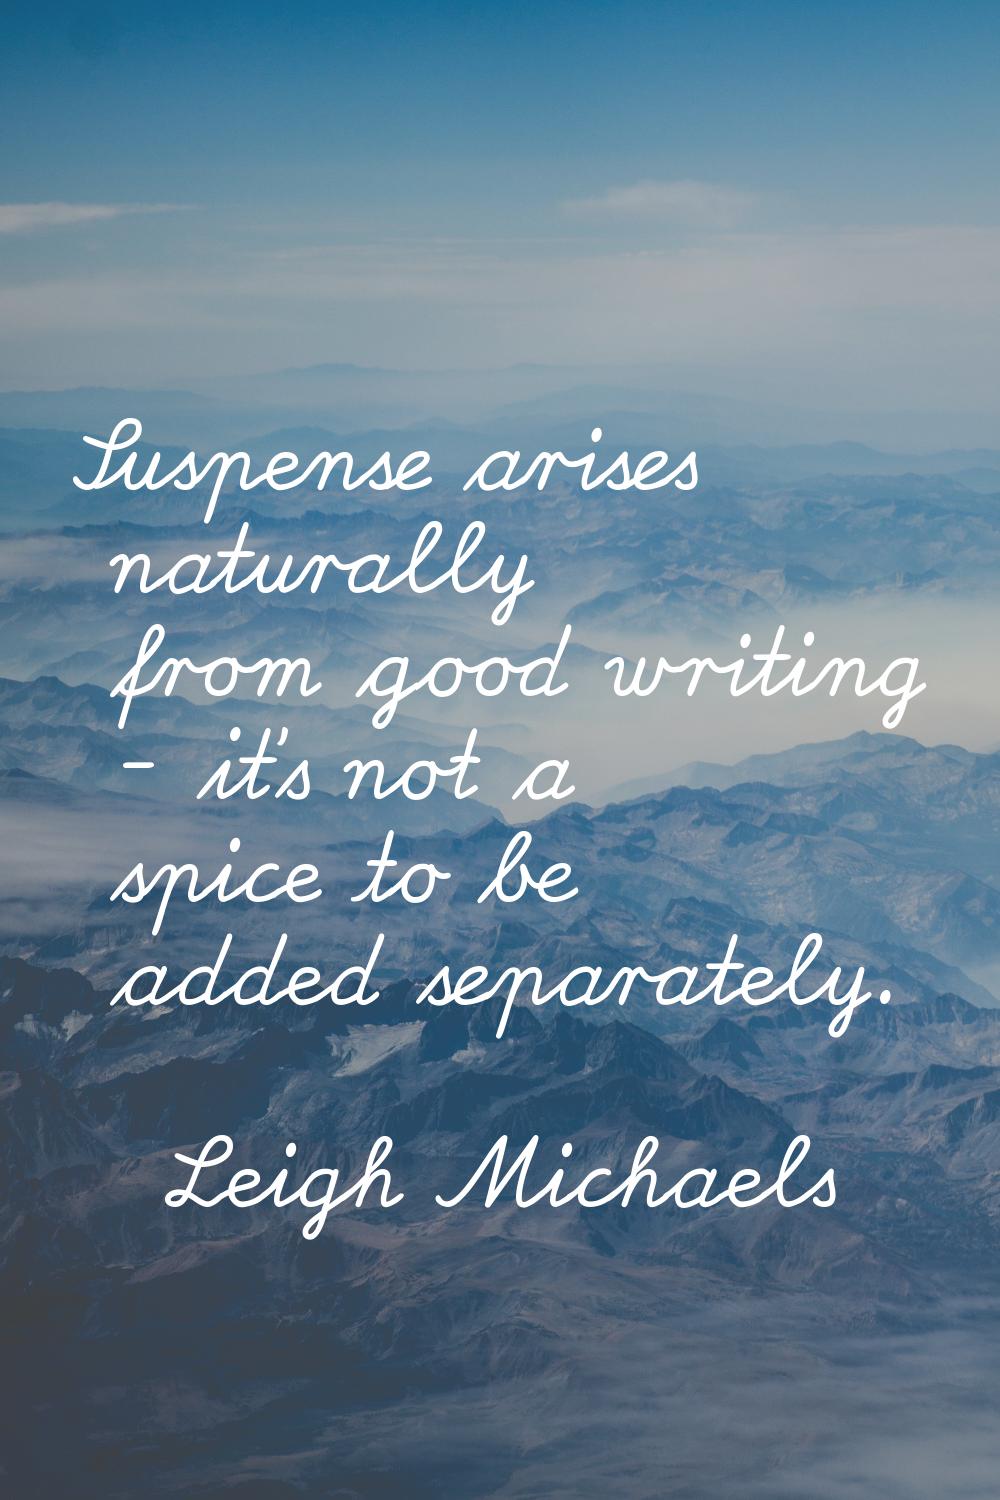 Suspense arises naturally from good writing - it's not a spice to be added separately.